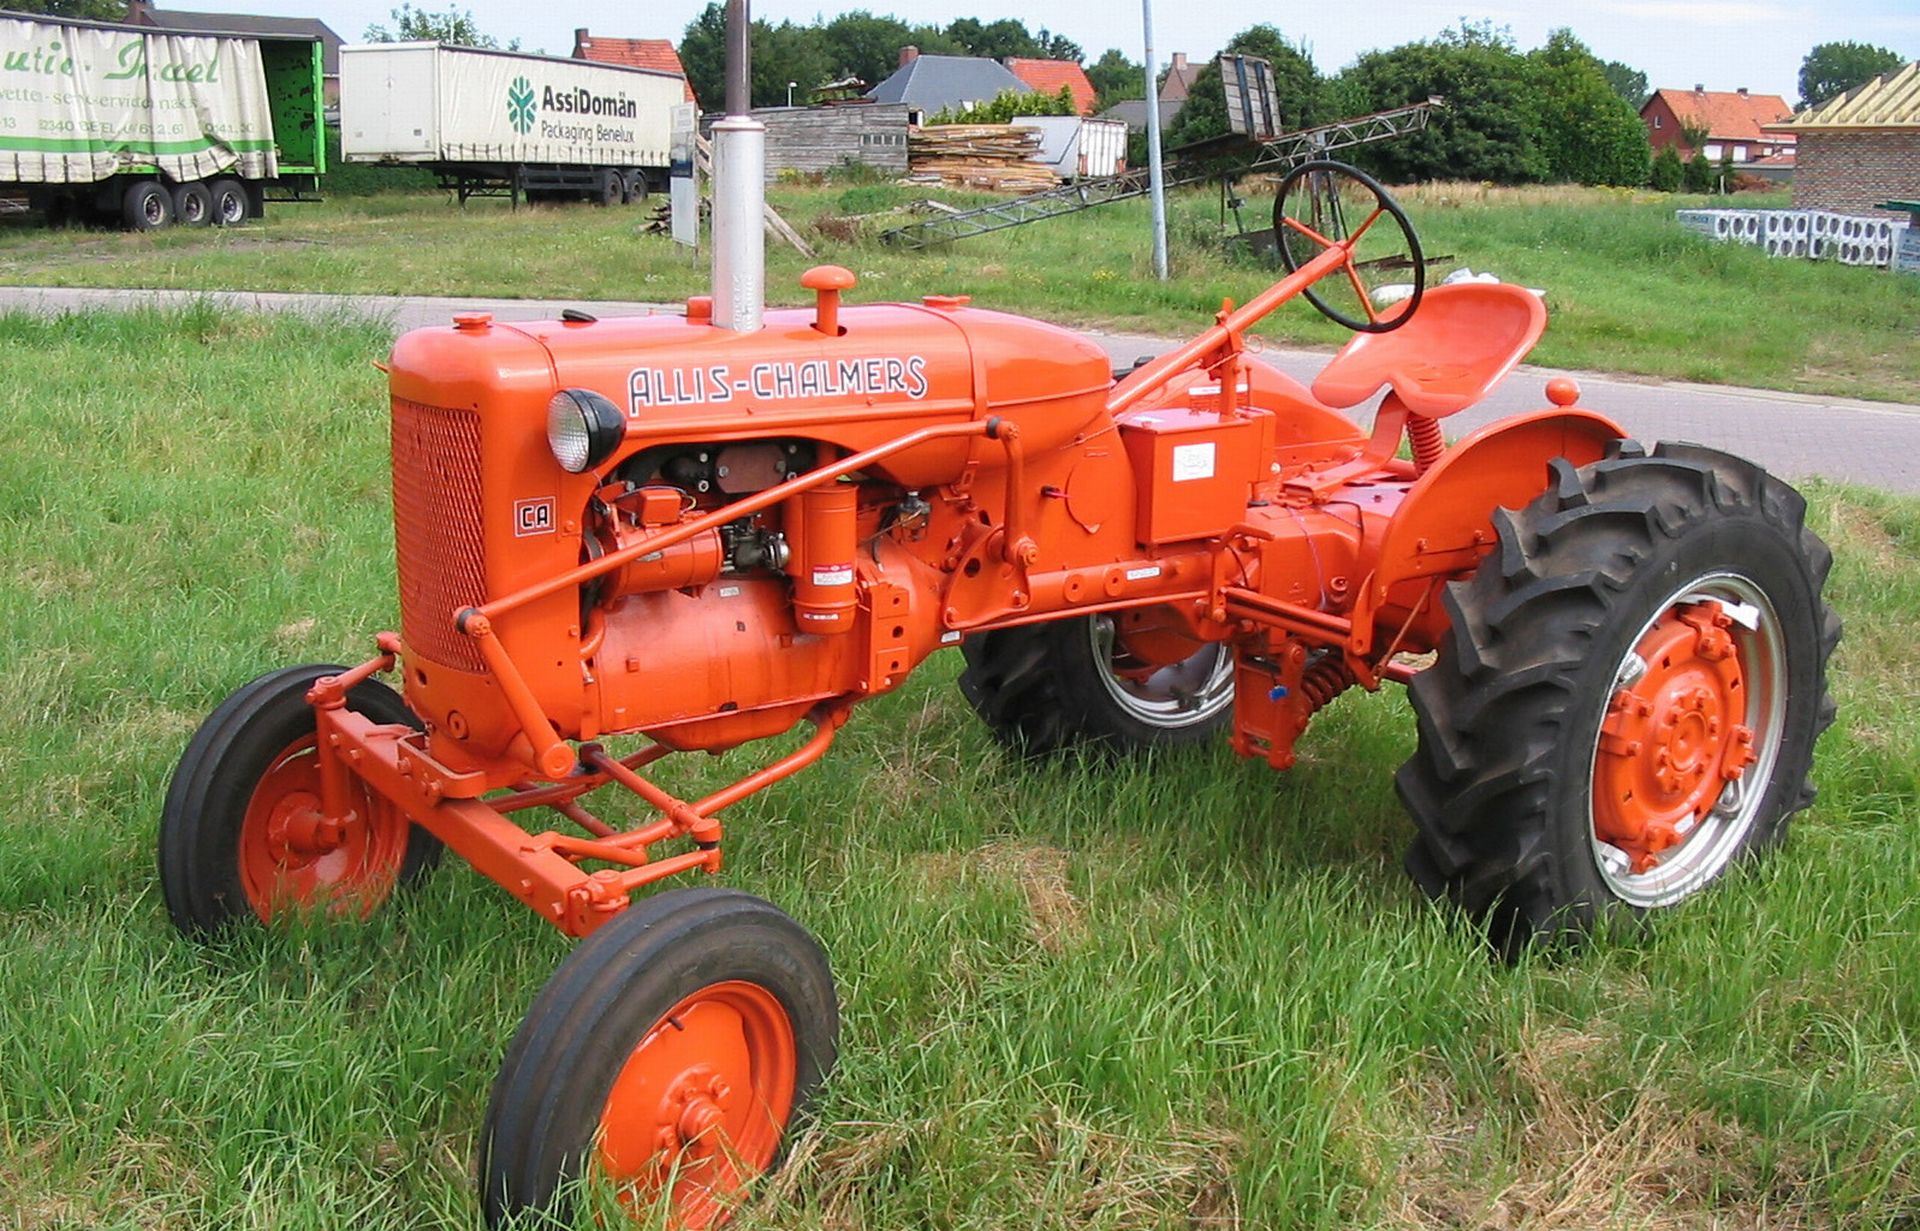 Allis Chalmers Ca Tractor Tractors Photo 3 Pictures to pin on ...